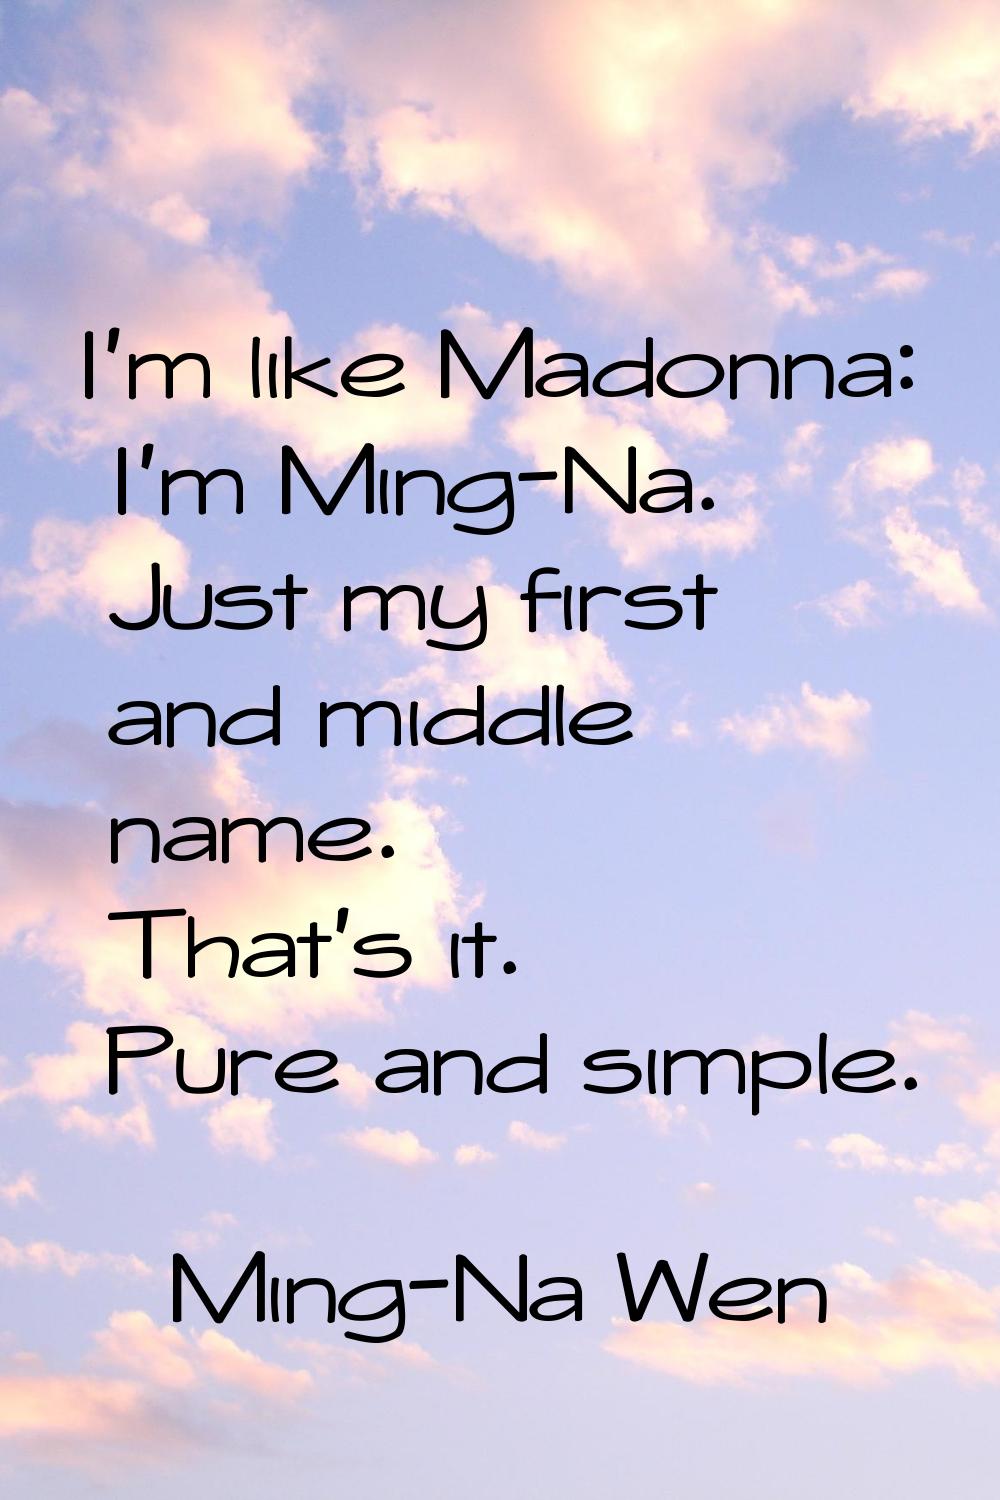 I'm like Madonna: I'm Ming-Na. Just my first and middle name. That's it. Pure and simple.